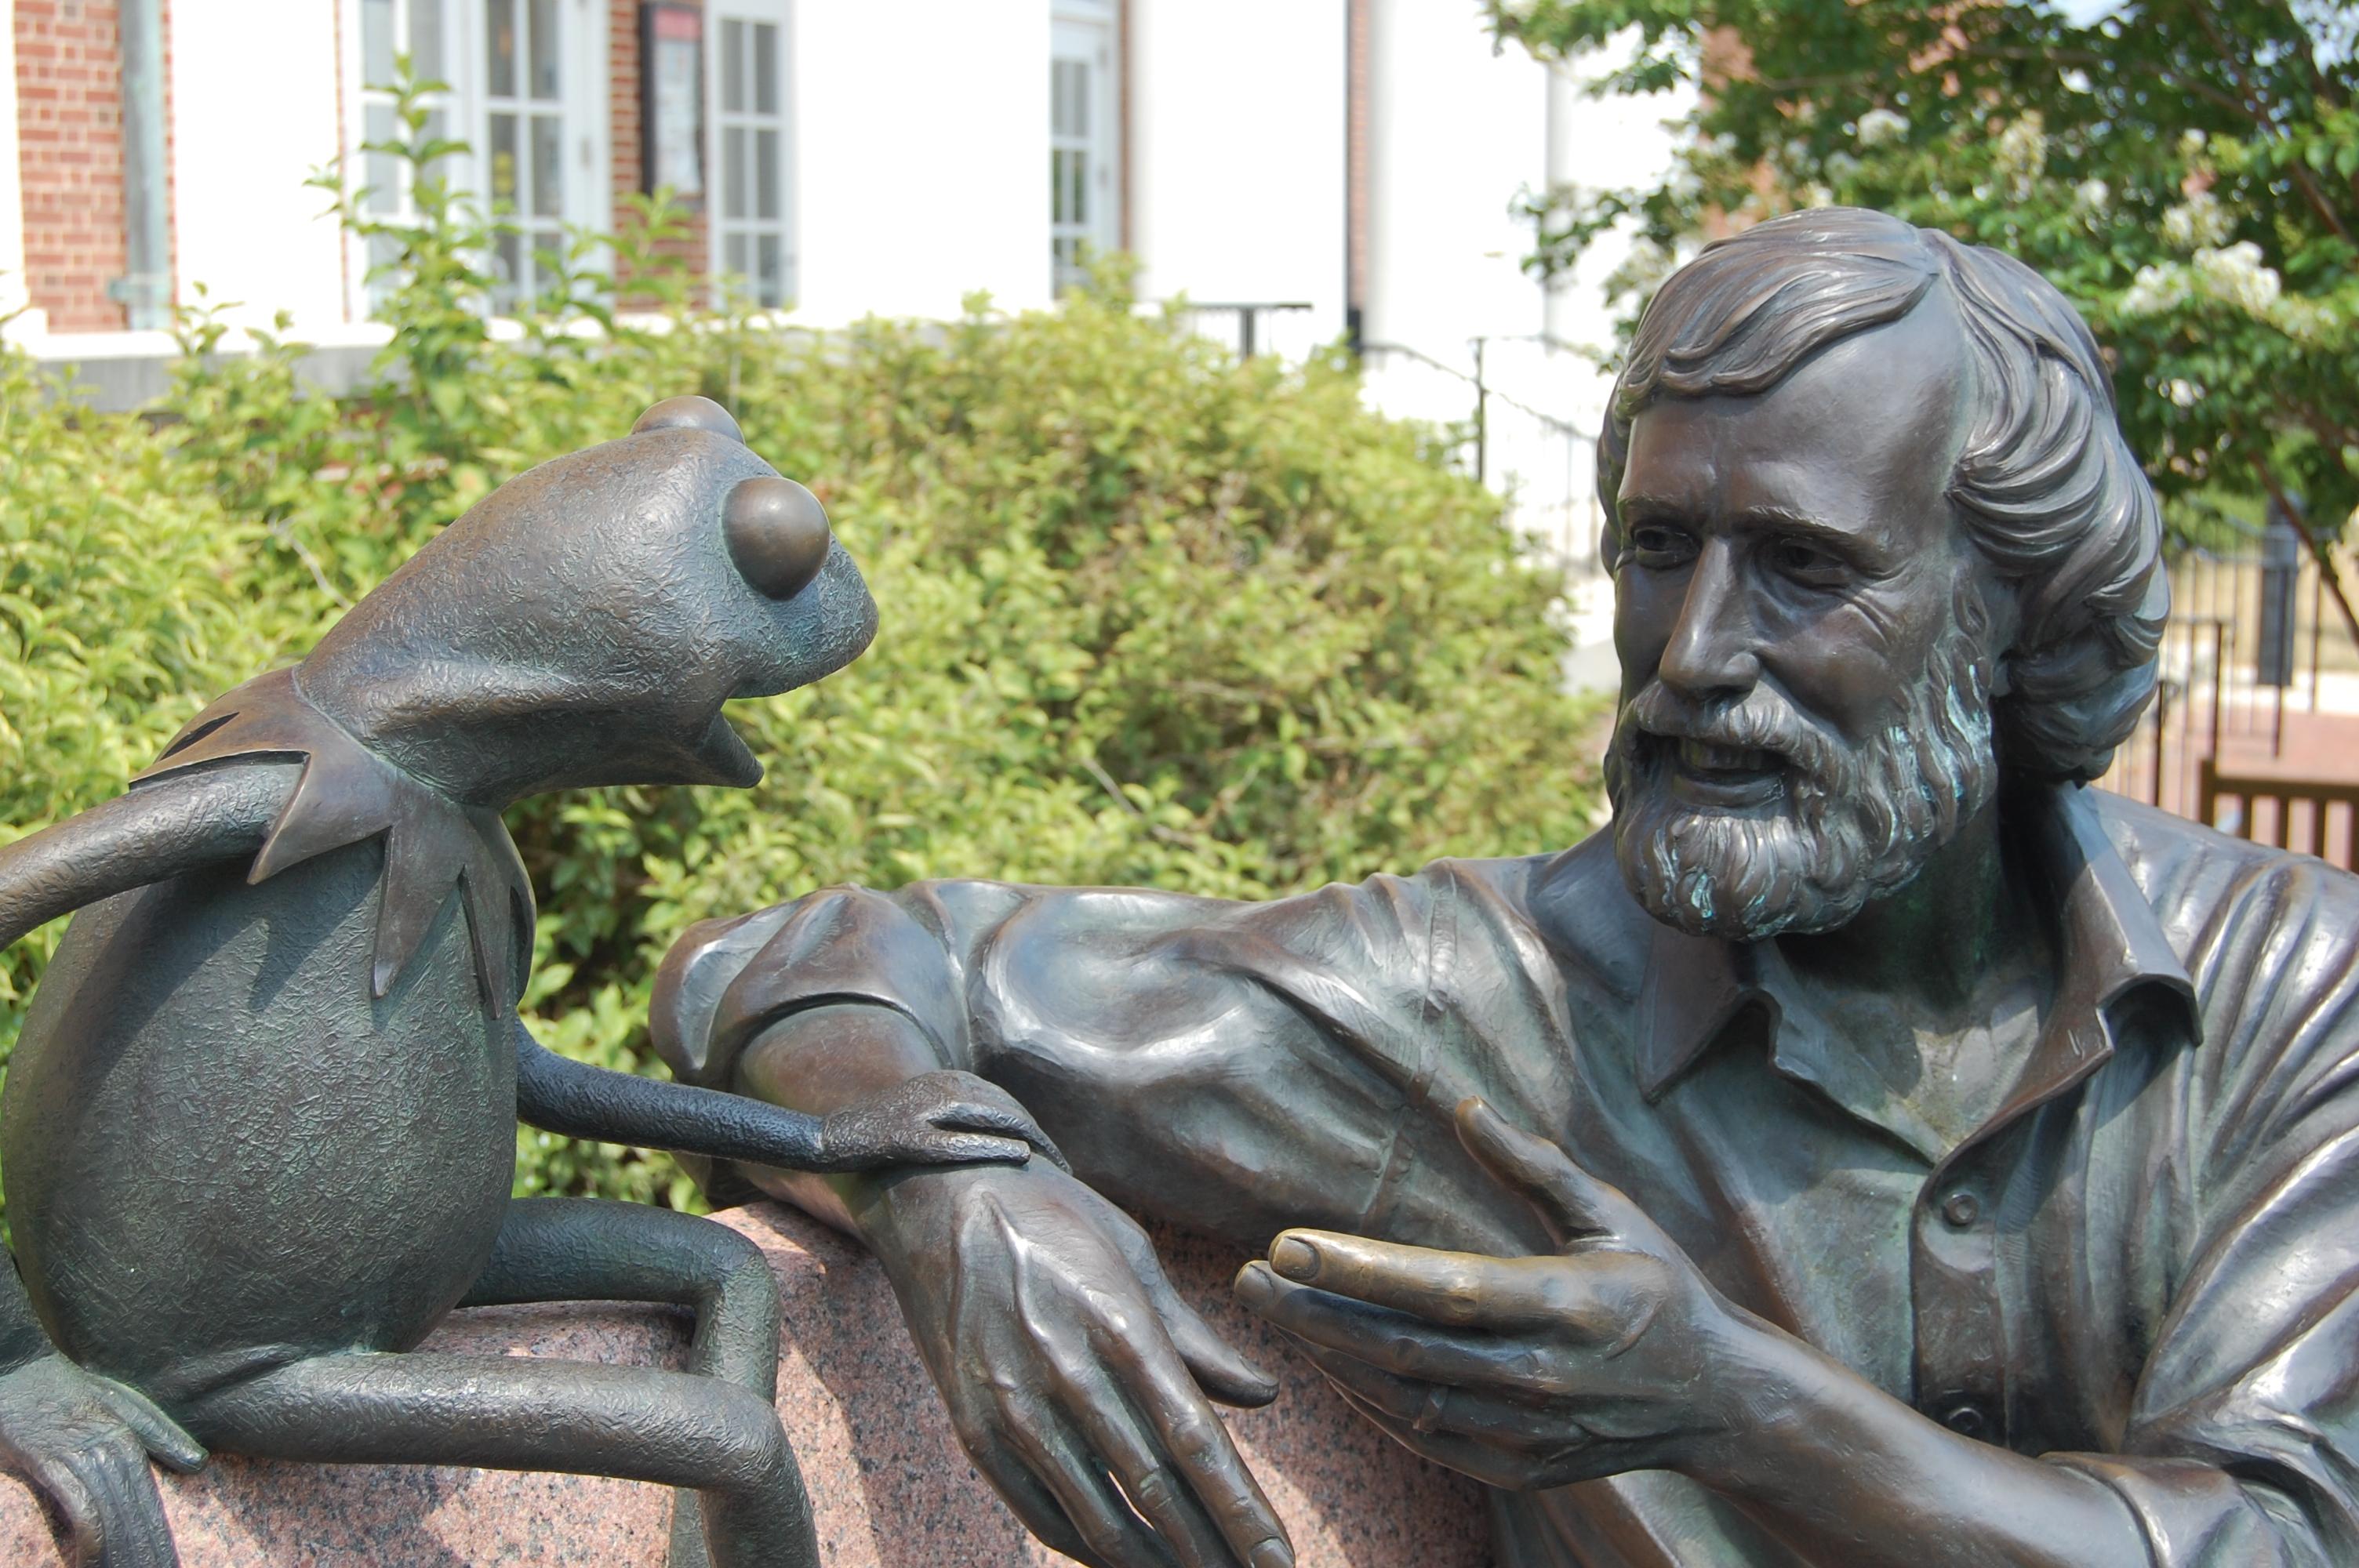 Statue of Jim Henson and Kermit the Frog on the campus of the University of Maryland. (Credit: Flickr user benclark. Used via Creative Commons Attribution 2.0 Generic (CC BY 2.0))